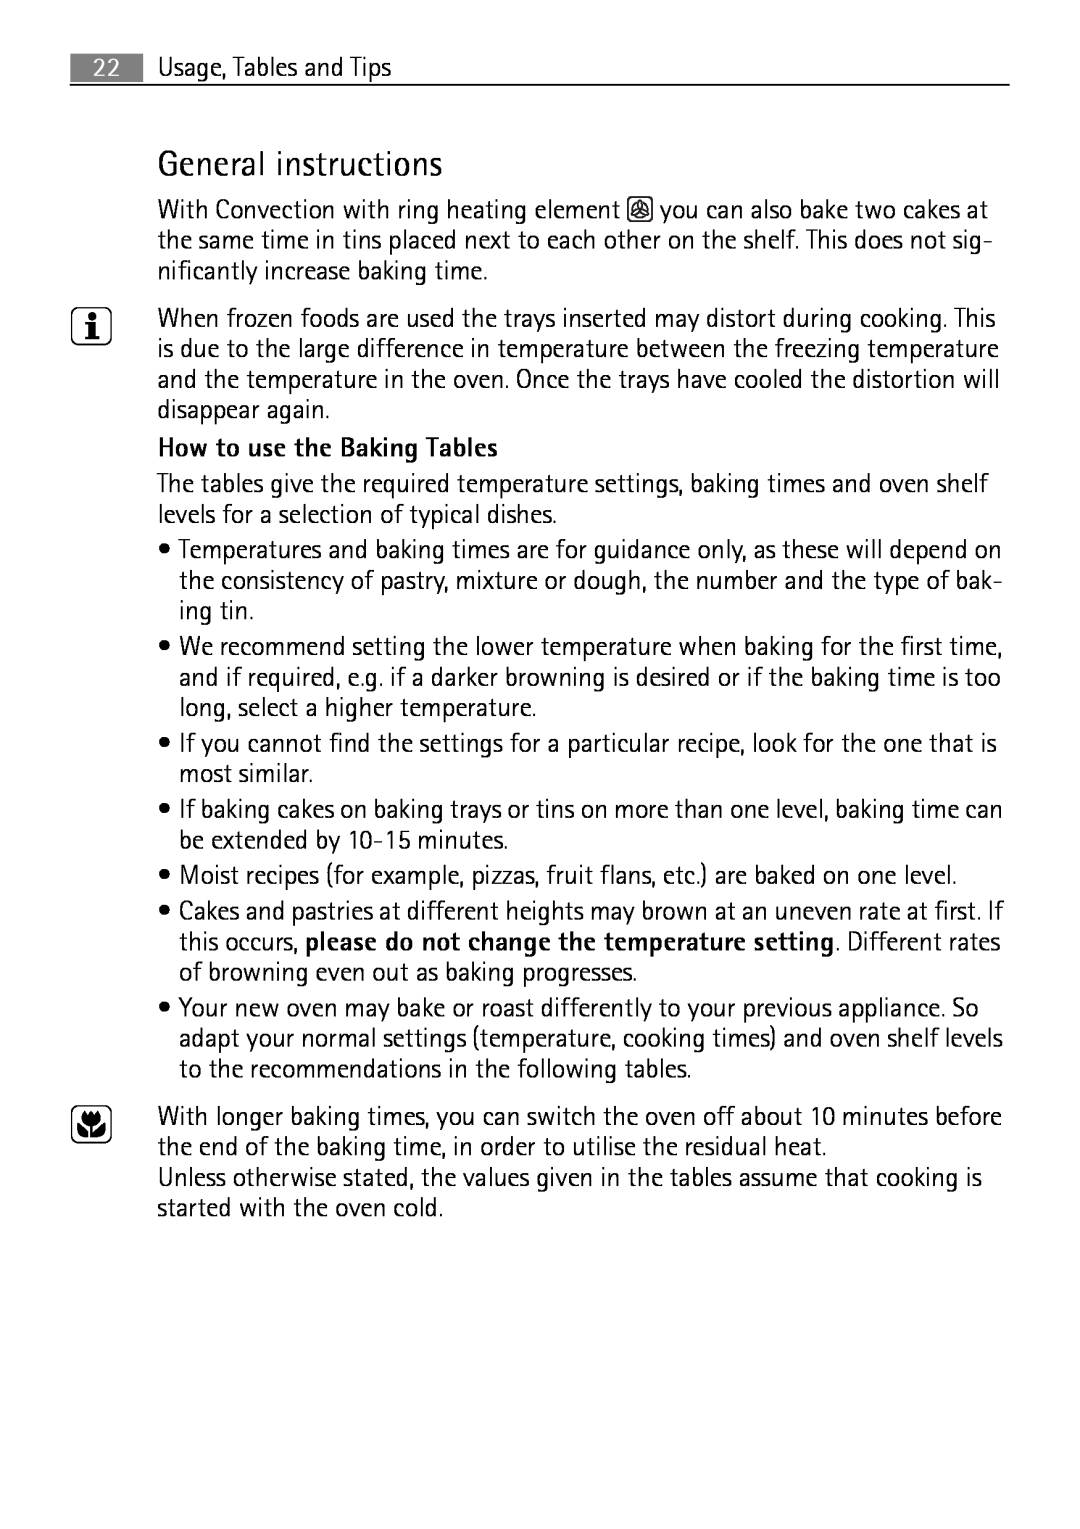 Electrolux B2100-5 user manual General instructions, How to use the Baking Tables 